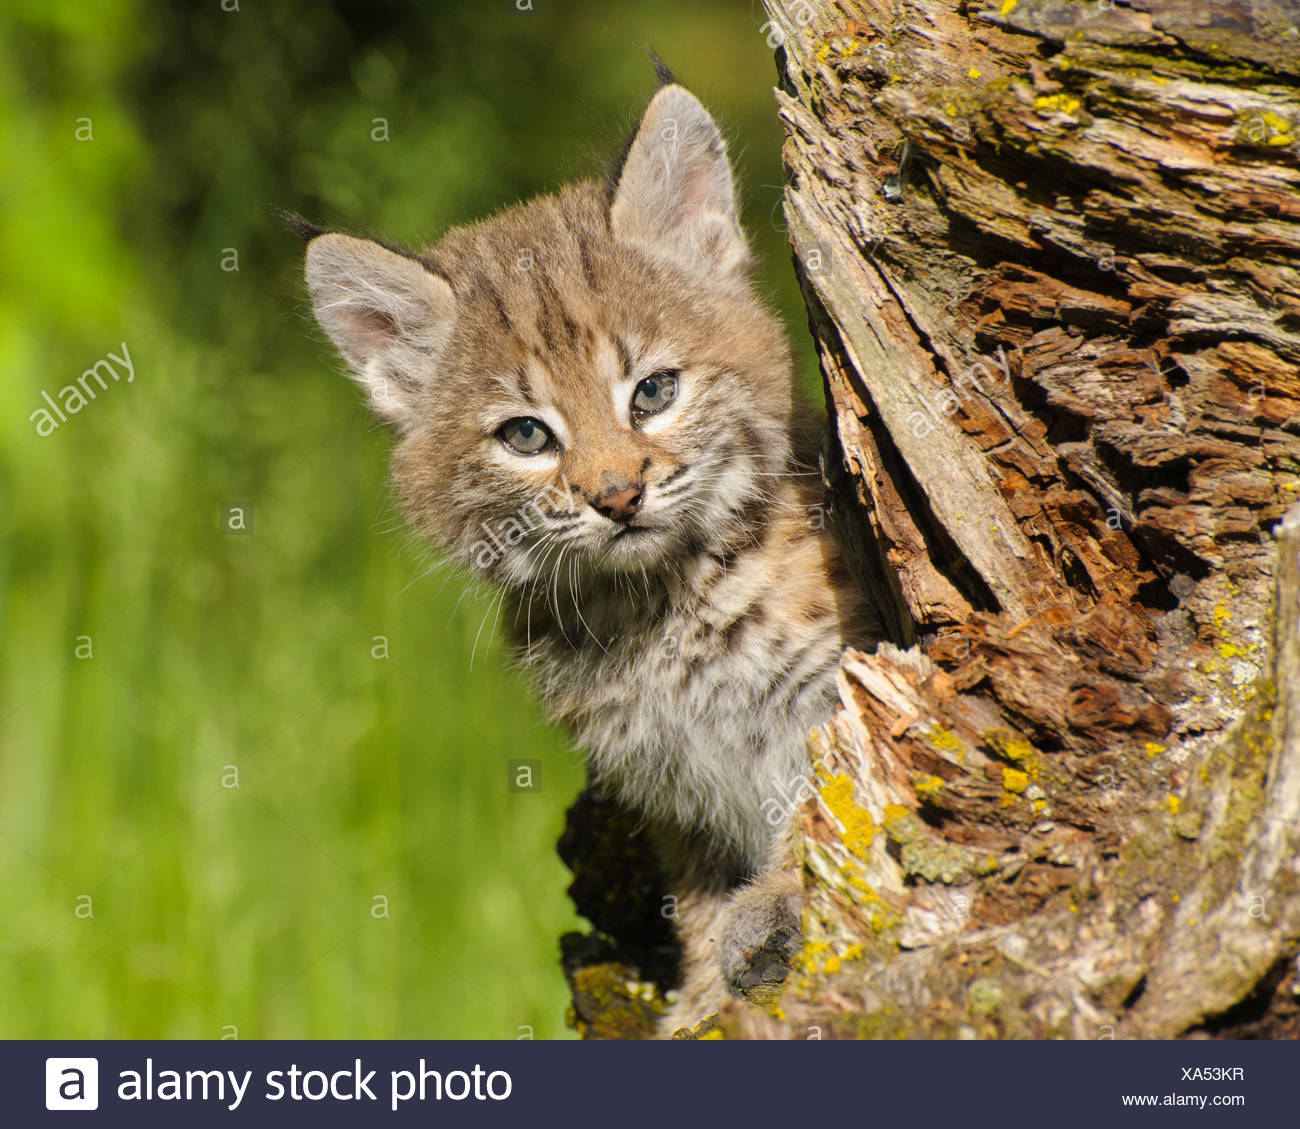 Juvenile Bobcat High Resolution Stock Photography and Images - Alamy